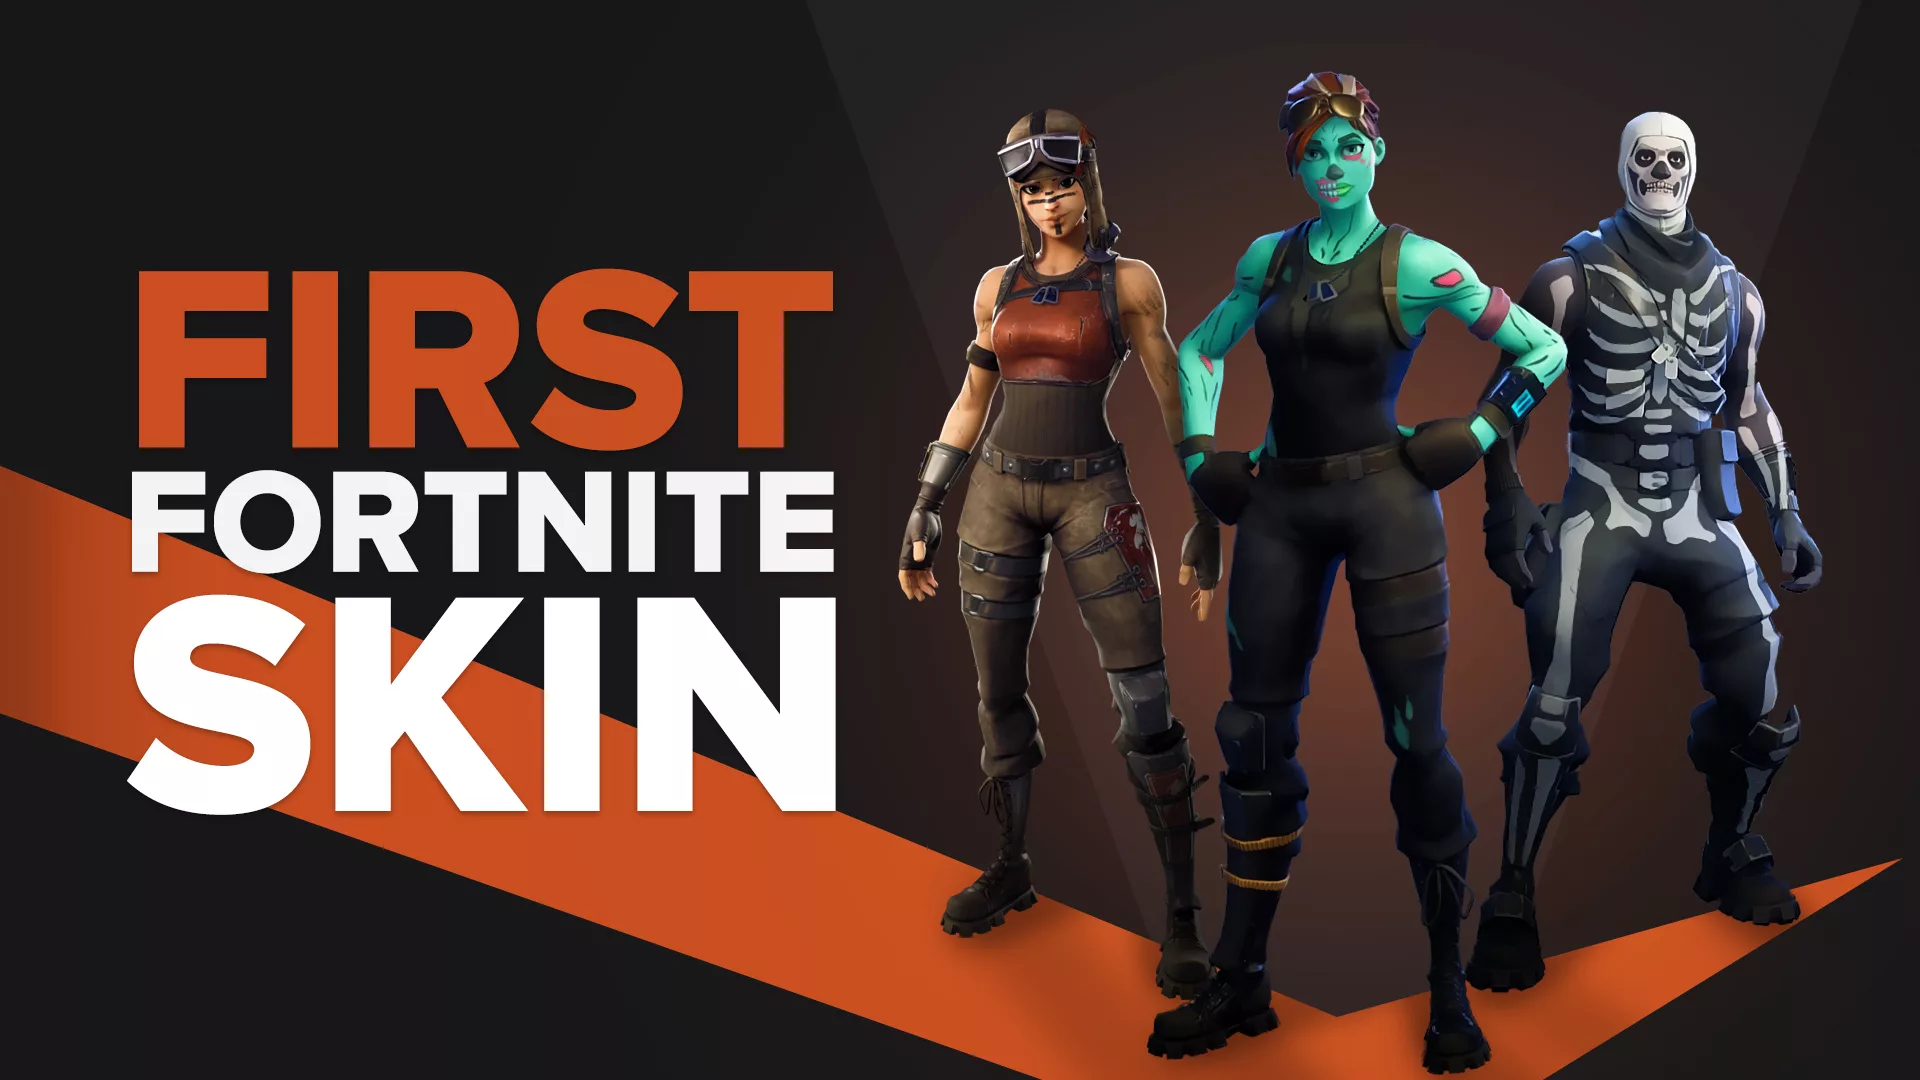 What Was the First Fortnite Skin?